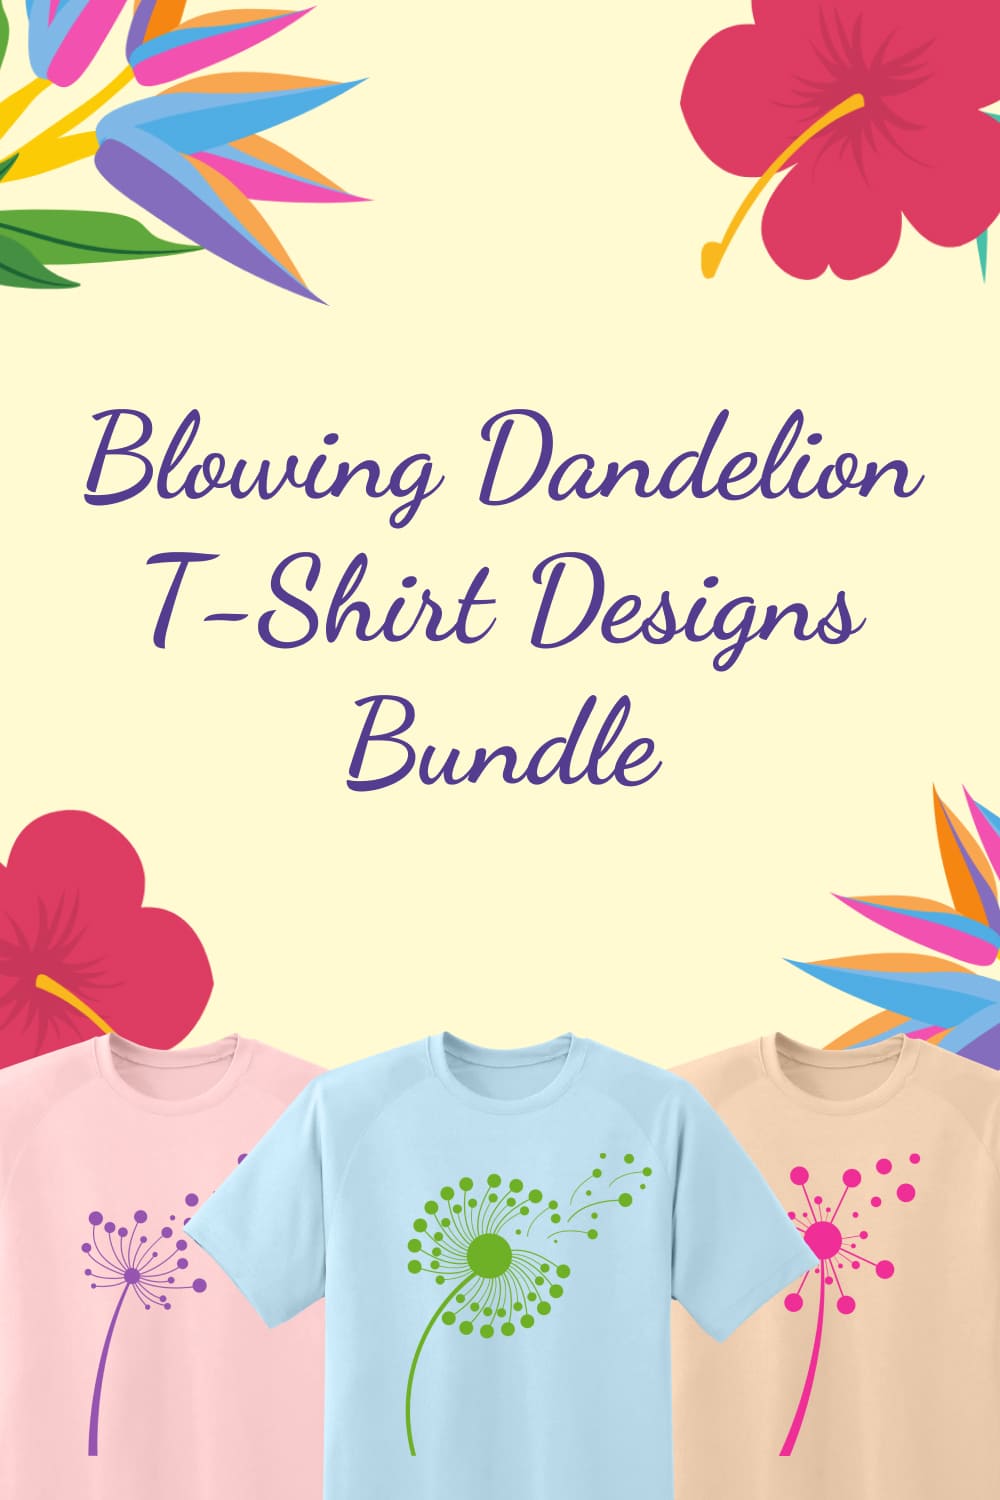 Pack of t-shirt images with adorable dandelion prints.